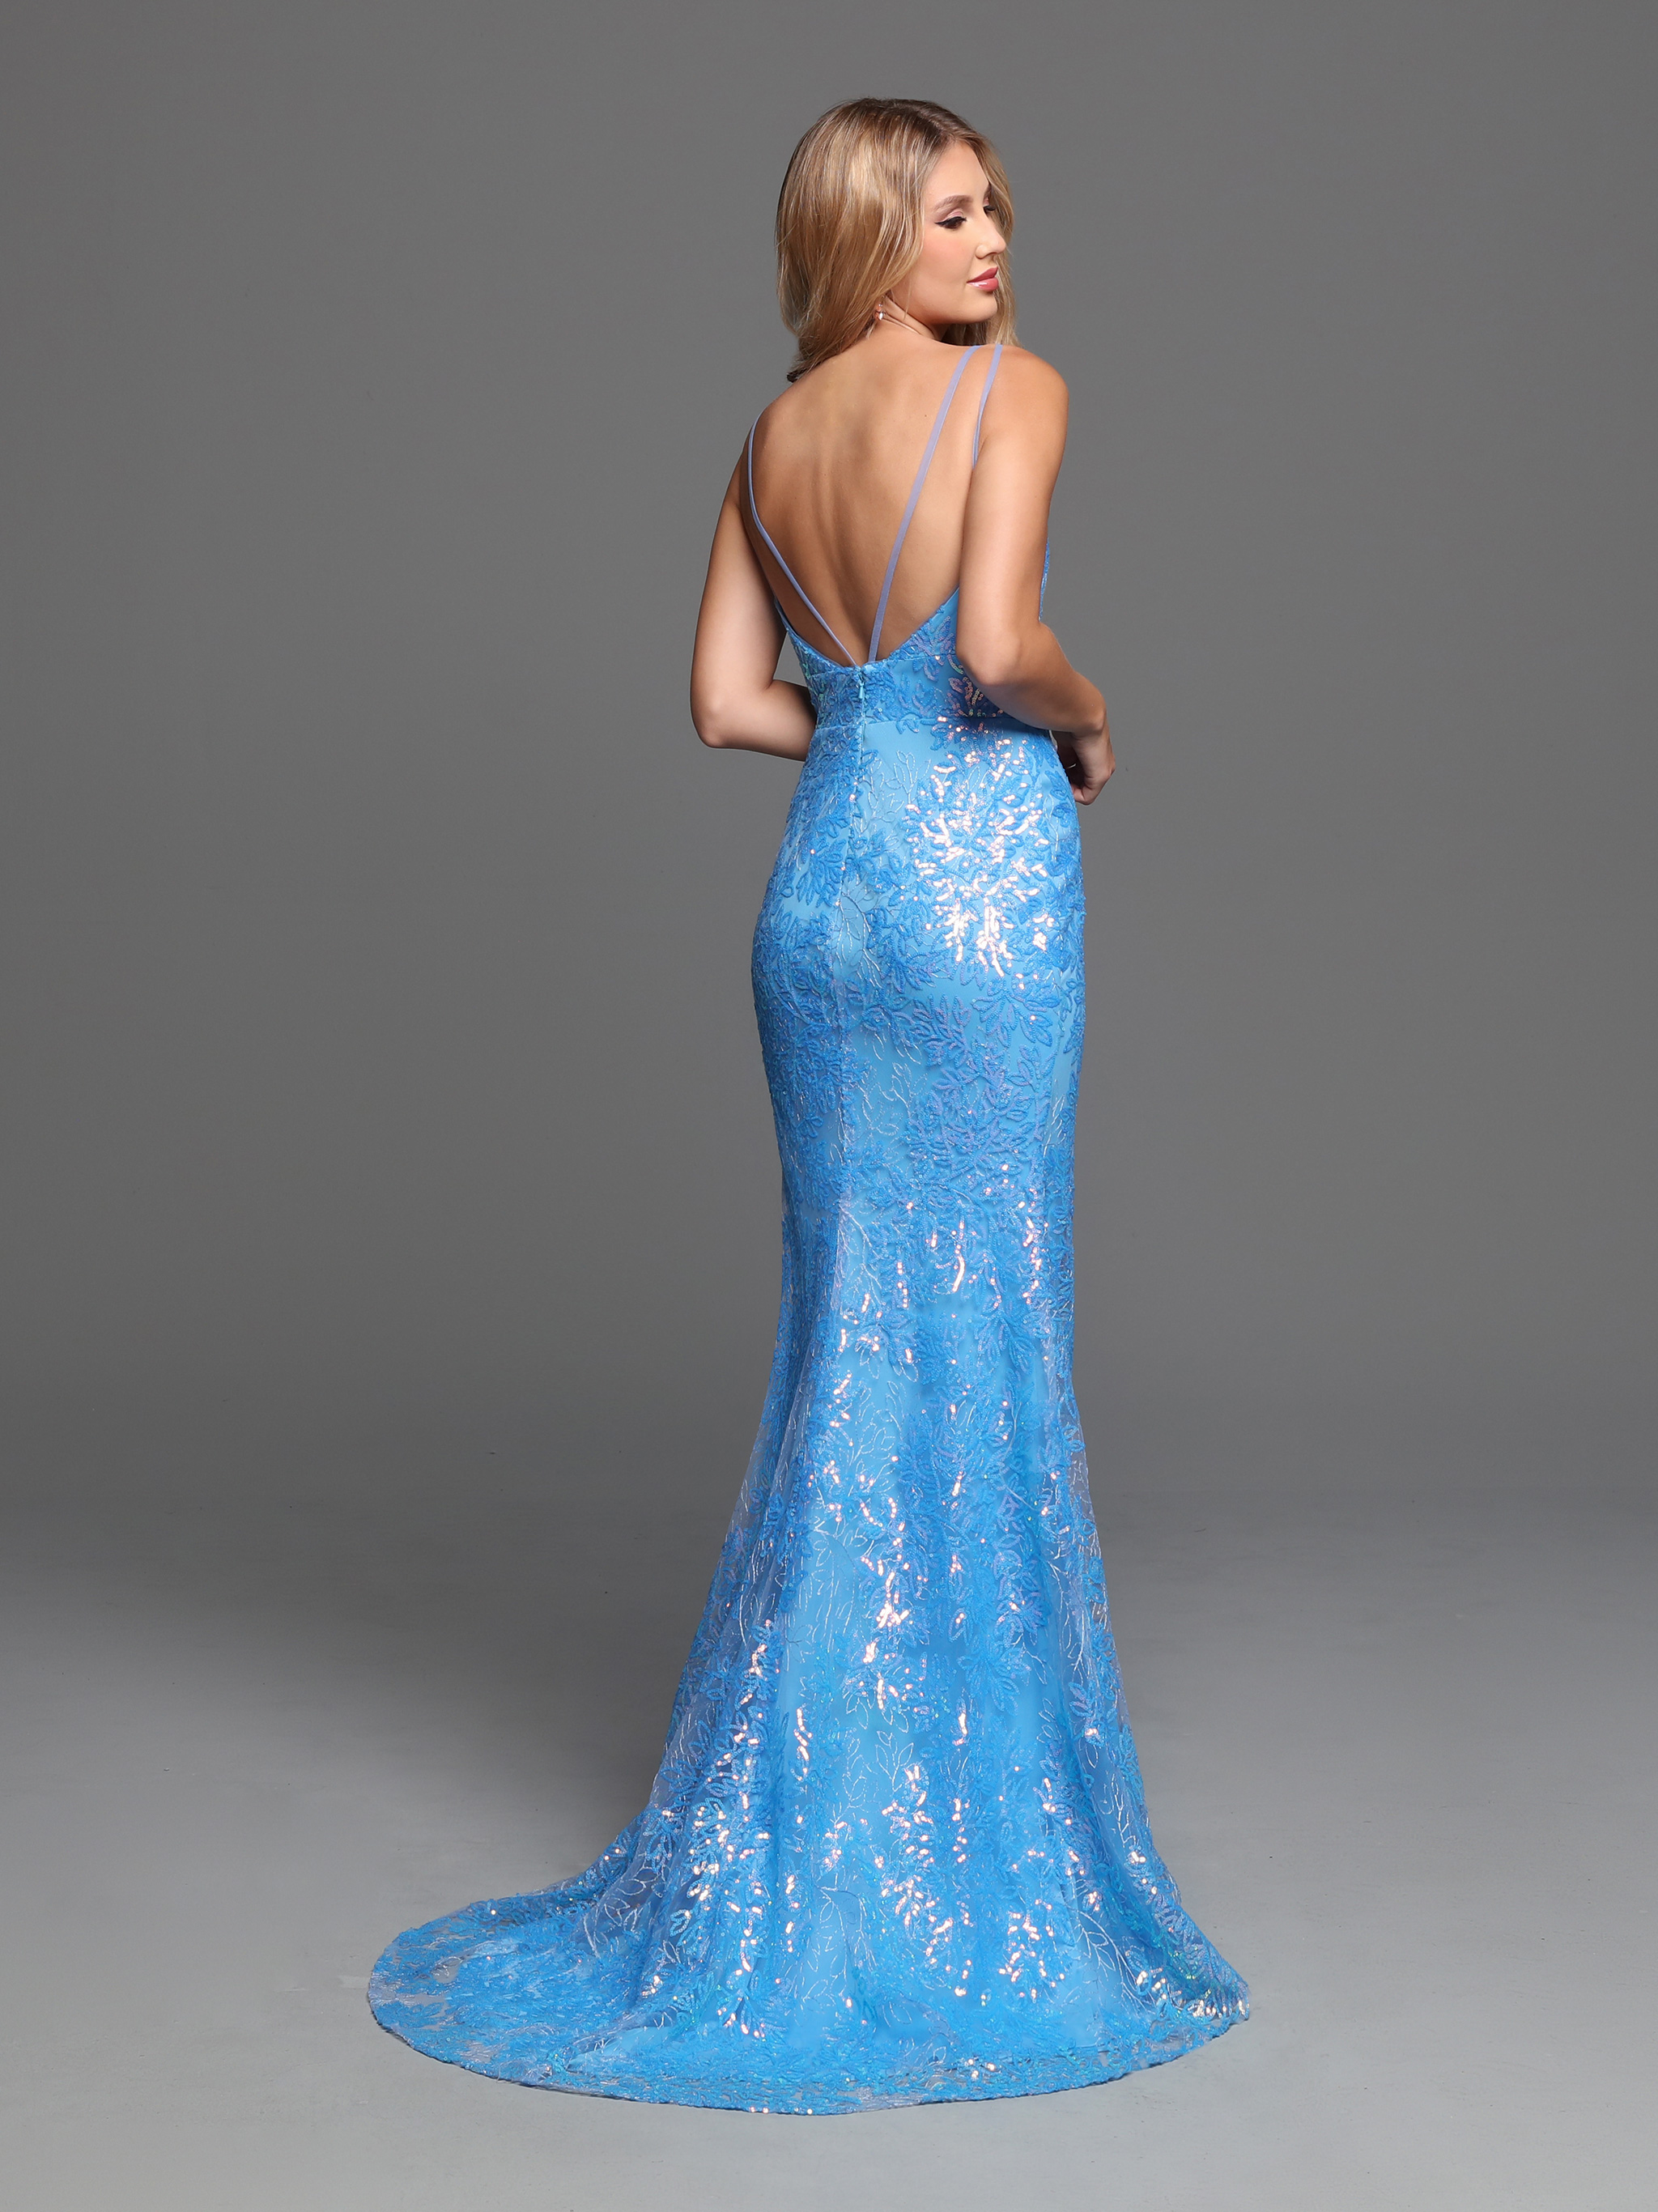 Image showing back view of style #72259